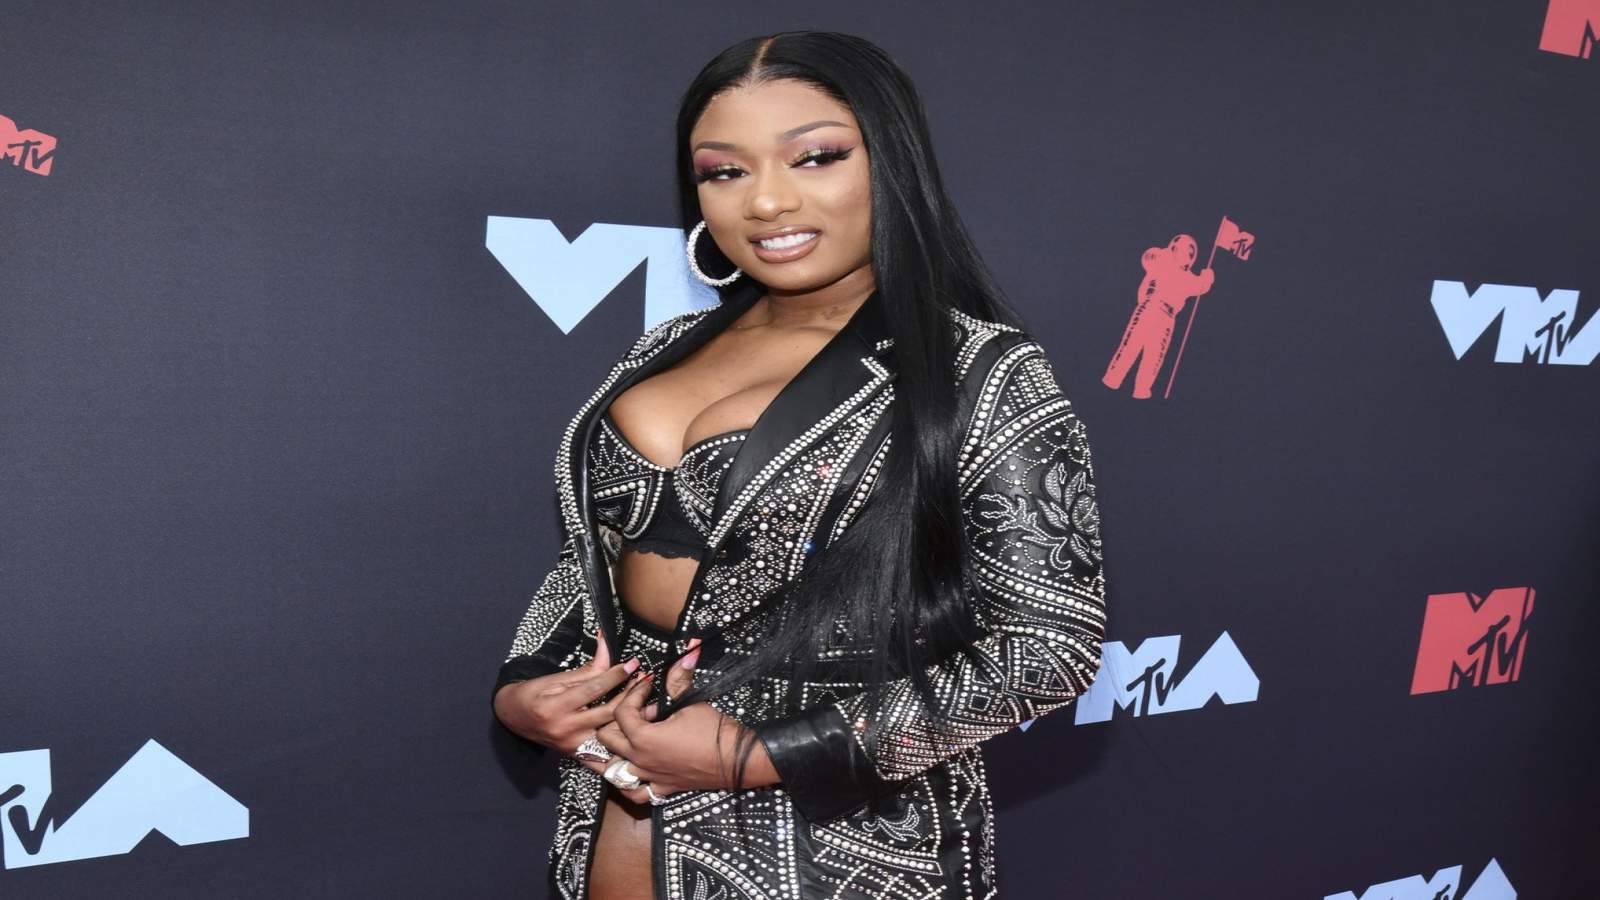 Houston rapper Megan Thee Stallion takes home VMA for Best Hip Hop Video